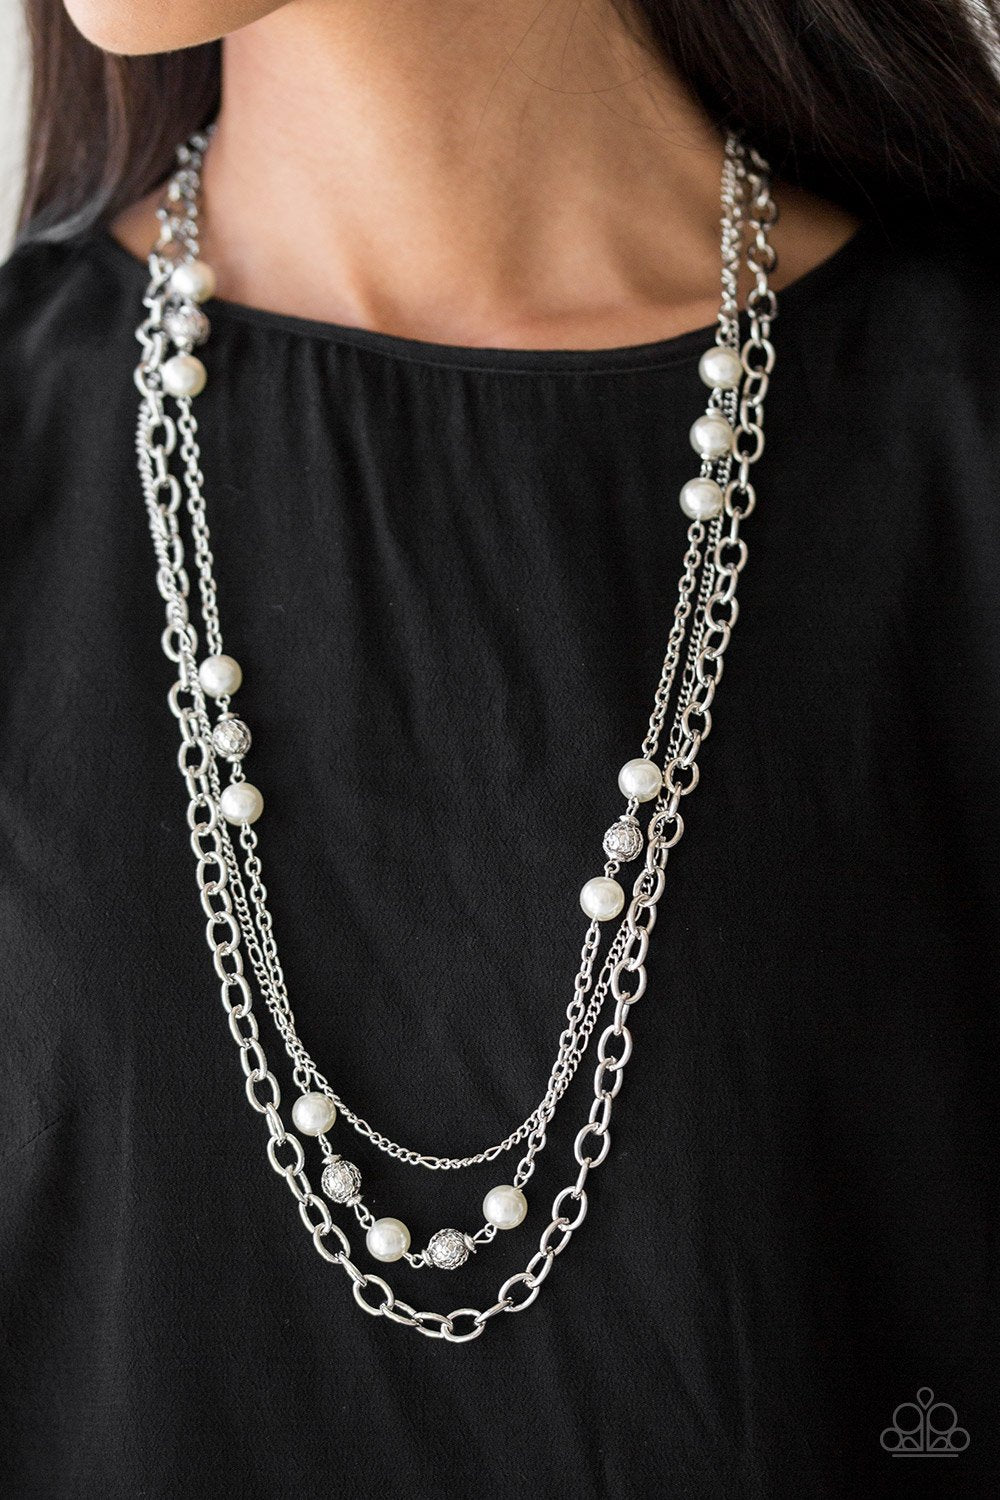 Classical Candence - white - Paparazzi necklace